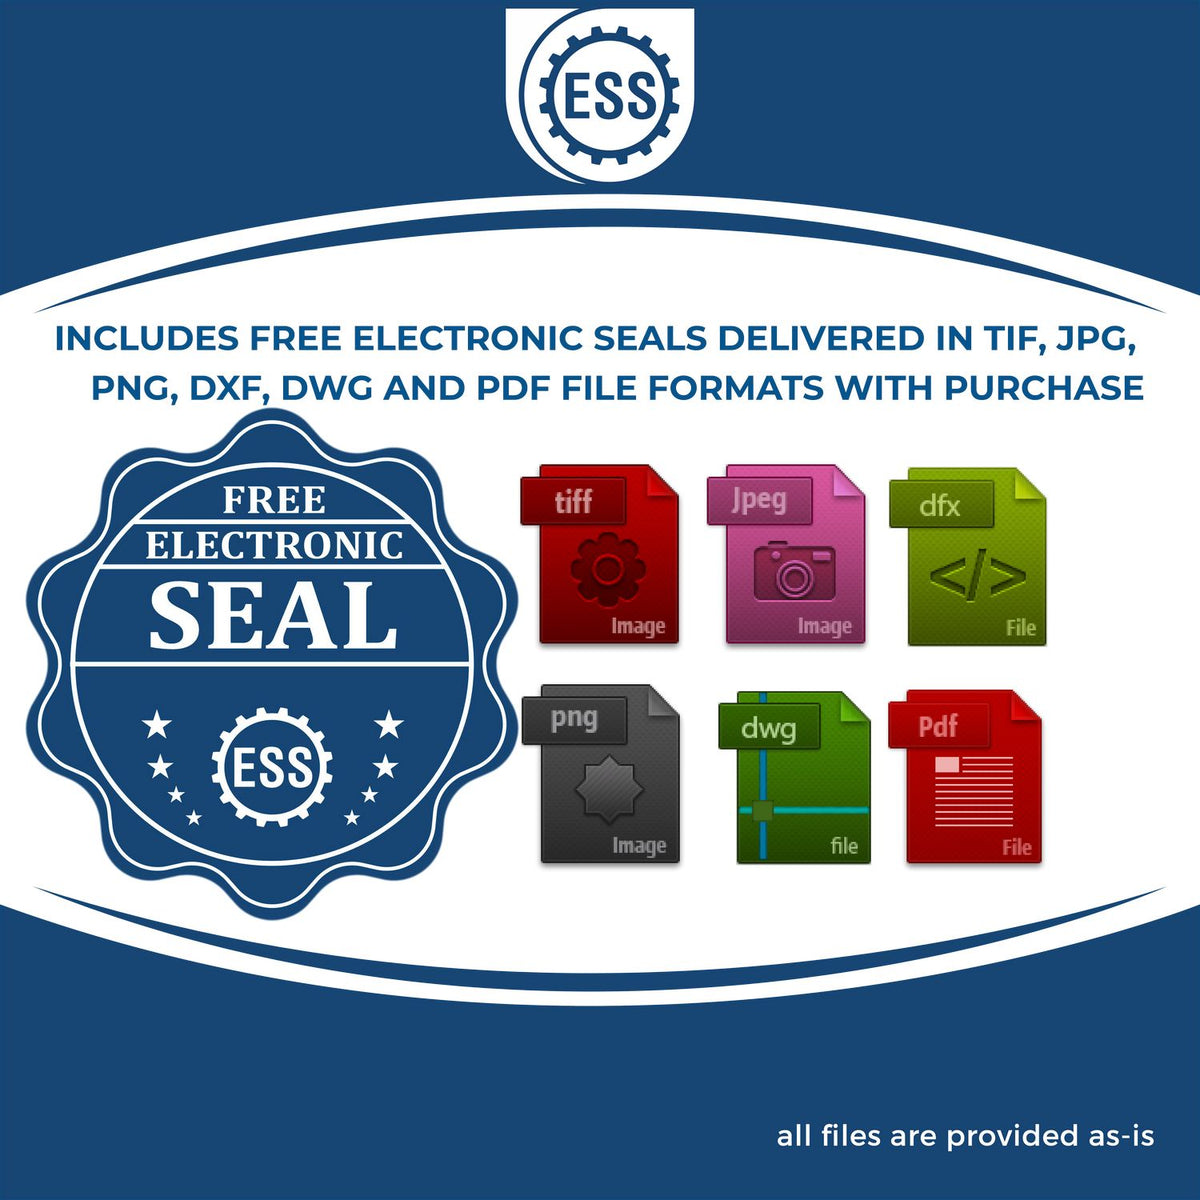 An infographic for the free electronic seal for the Pennsylvania Engineer Desk Seal illustrating the different file type icons such as DXF, DWG, TIF, JPG and PNG.